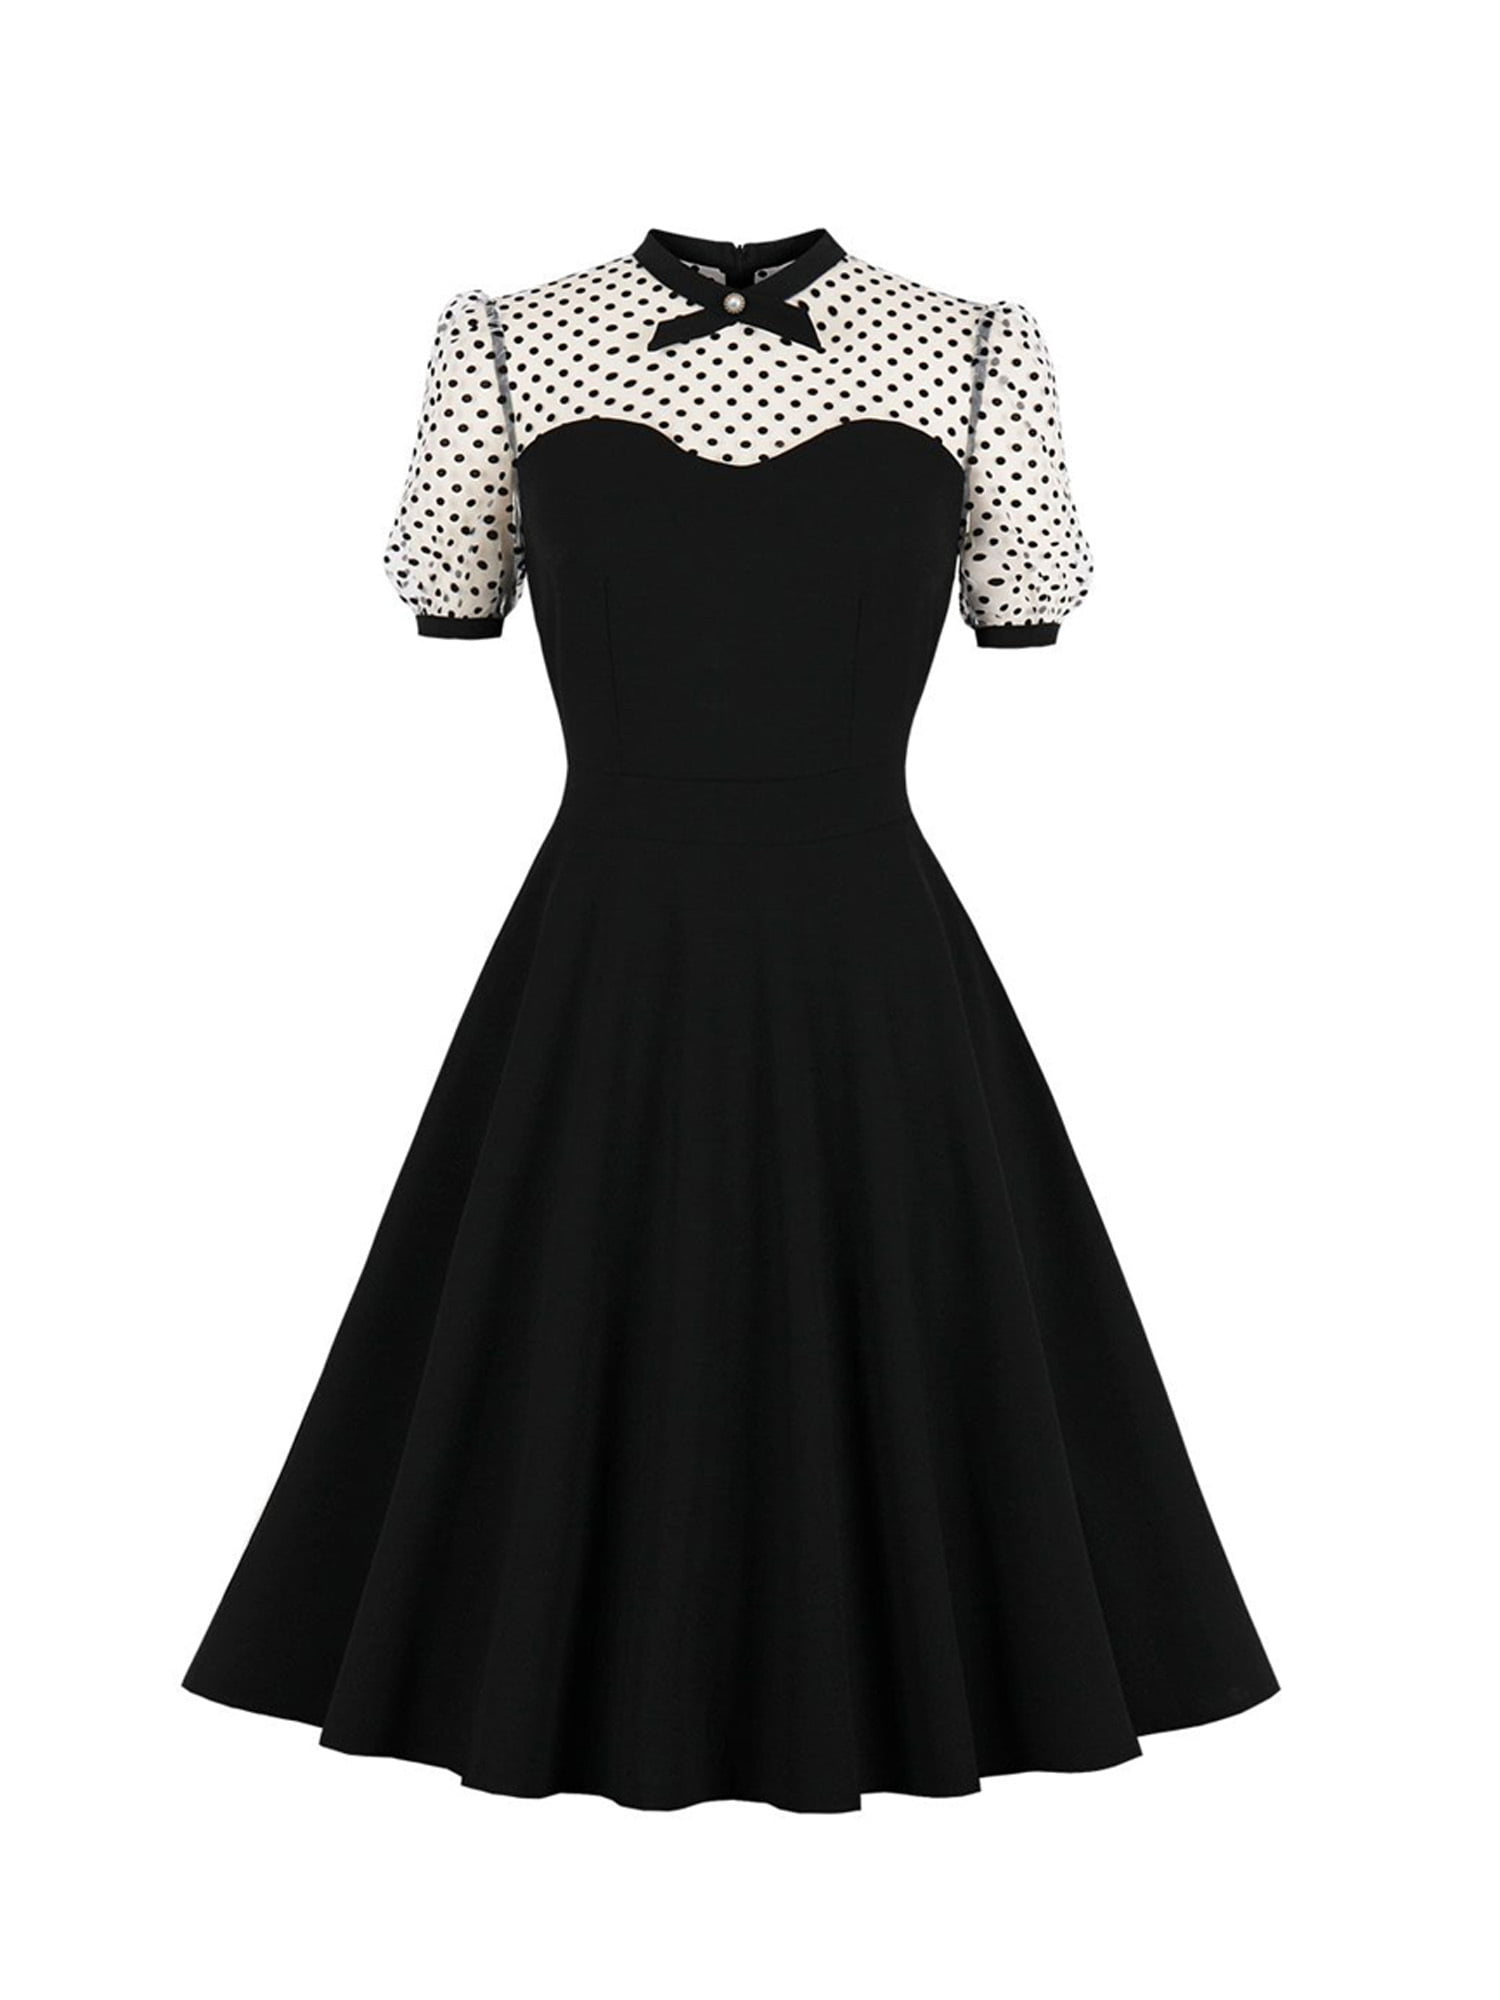 Women Vintage 50s Rockabilly Swing Skater Dress Evening Party Cocktail Pinup US 